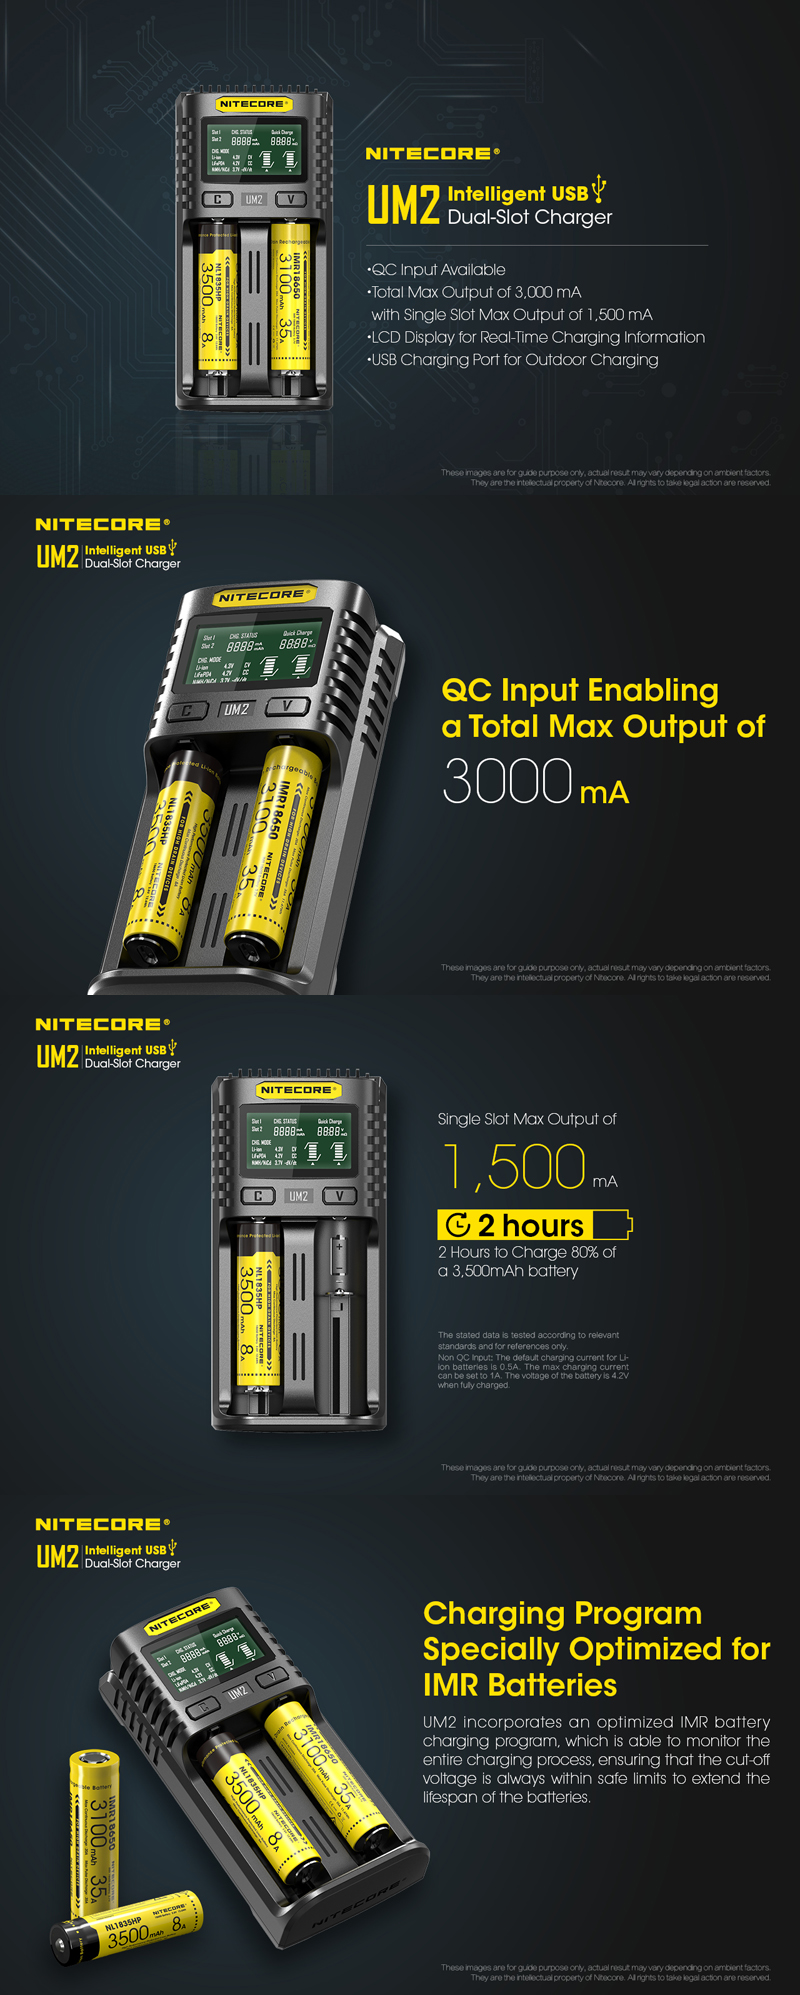 NITECORE UM4/UM2 LCD Screen Display Lithium Battery Charger 4-Slots USB Charging Smart Rapid Battery Charger